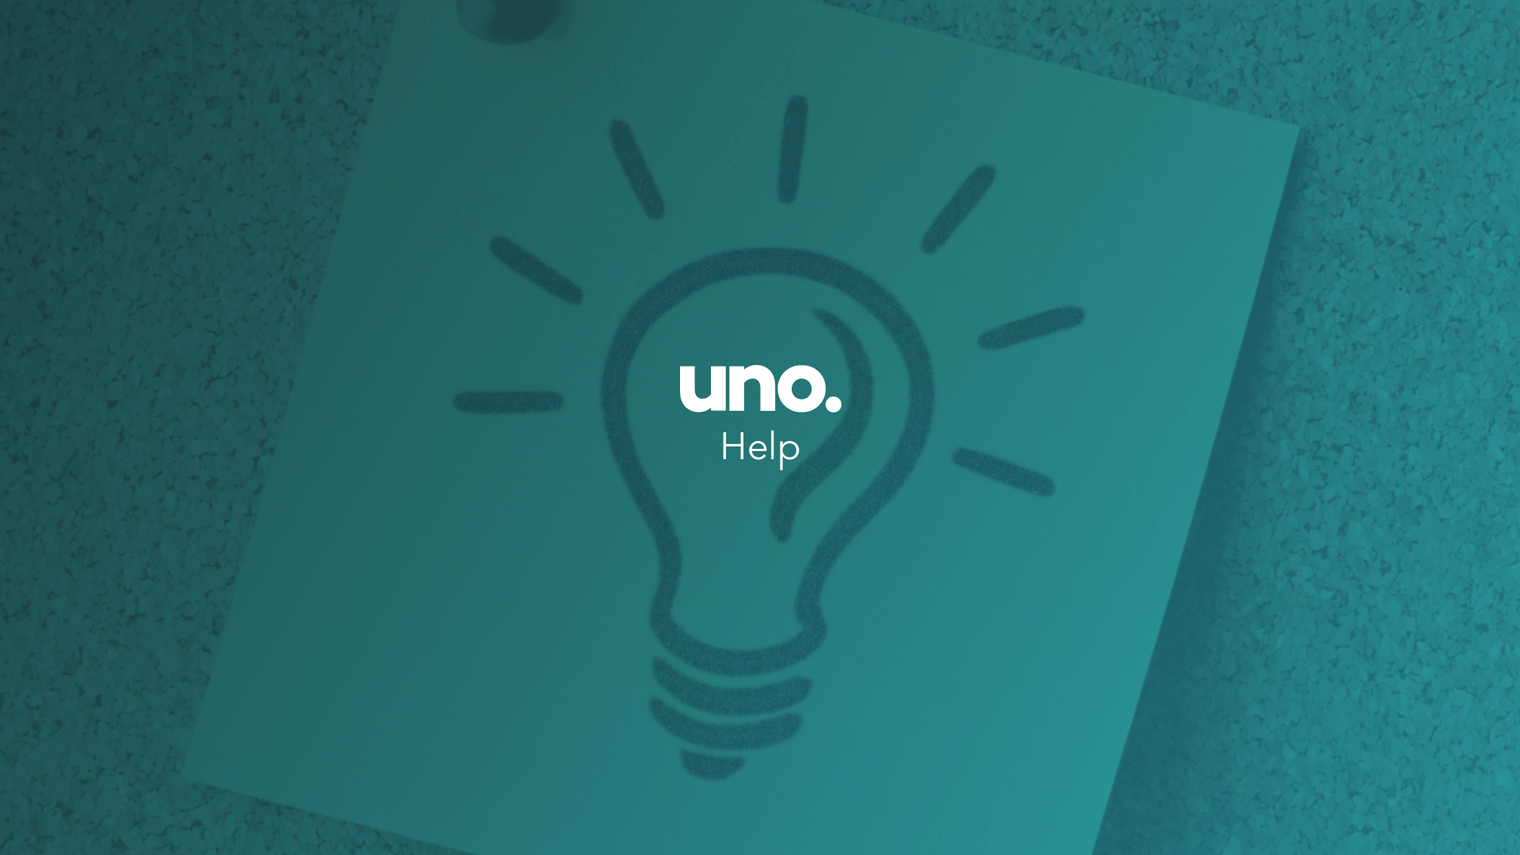 Does uno hold a credit licence?